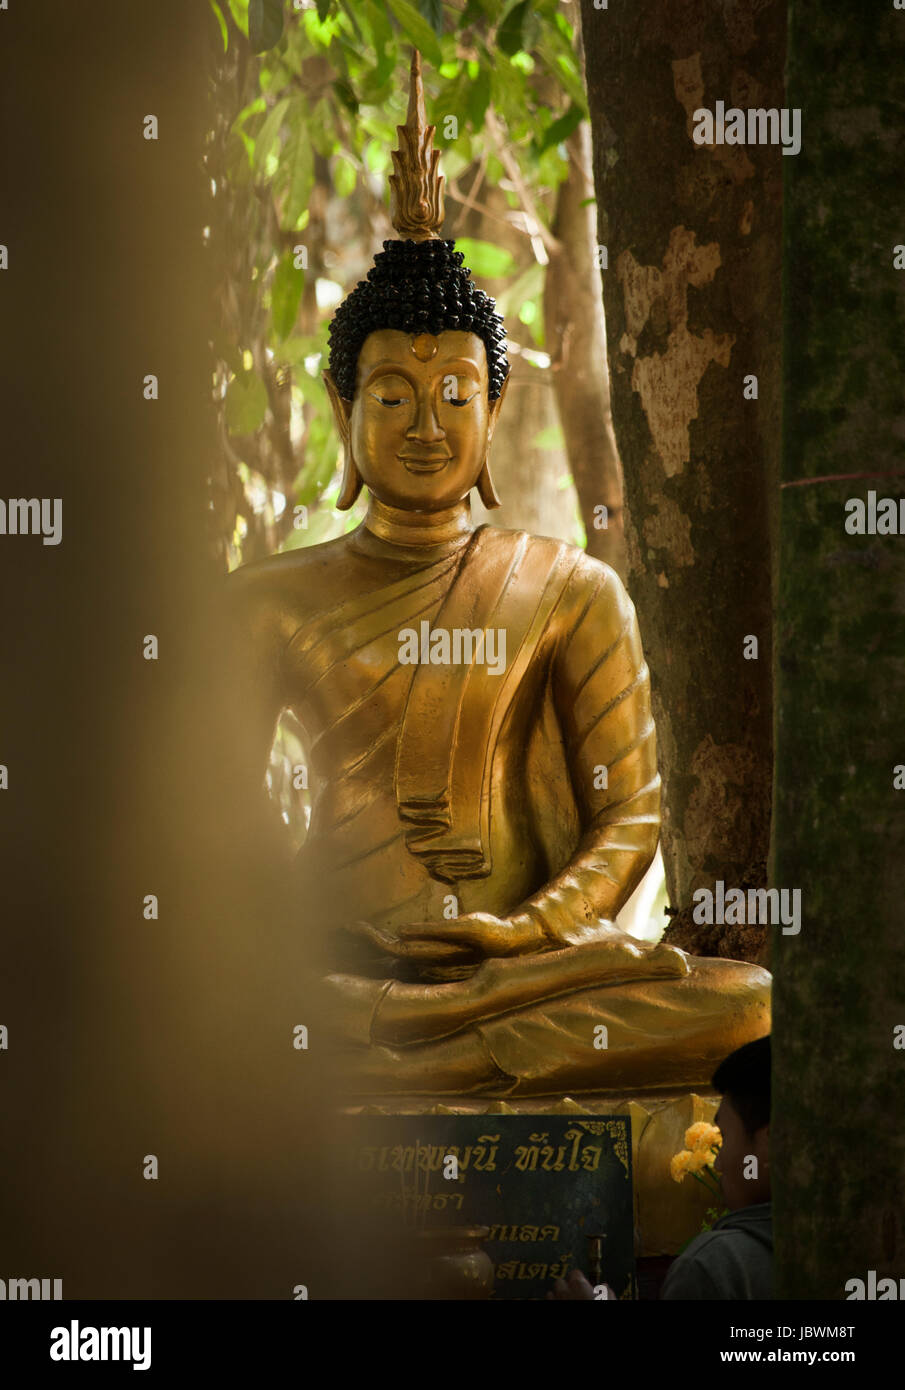 Buddha statue in forest monastery, Nan Province, Thailand. Stock Photo